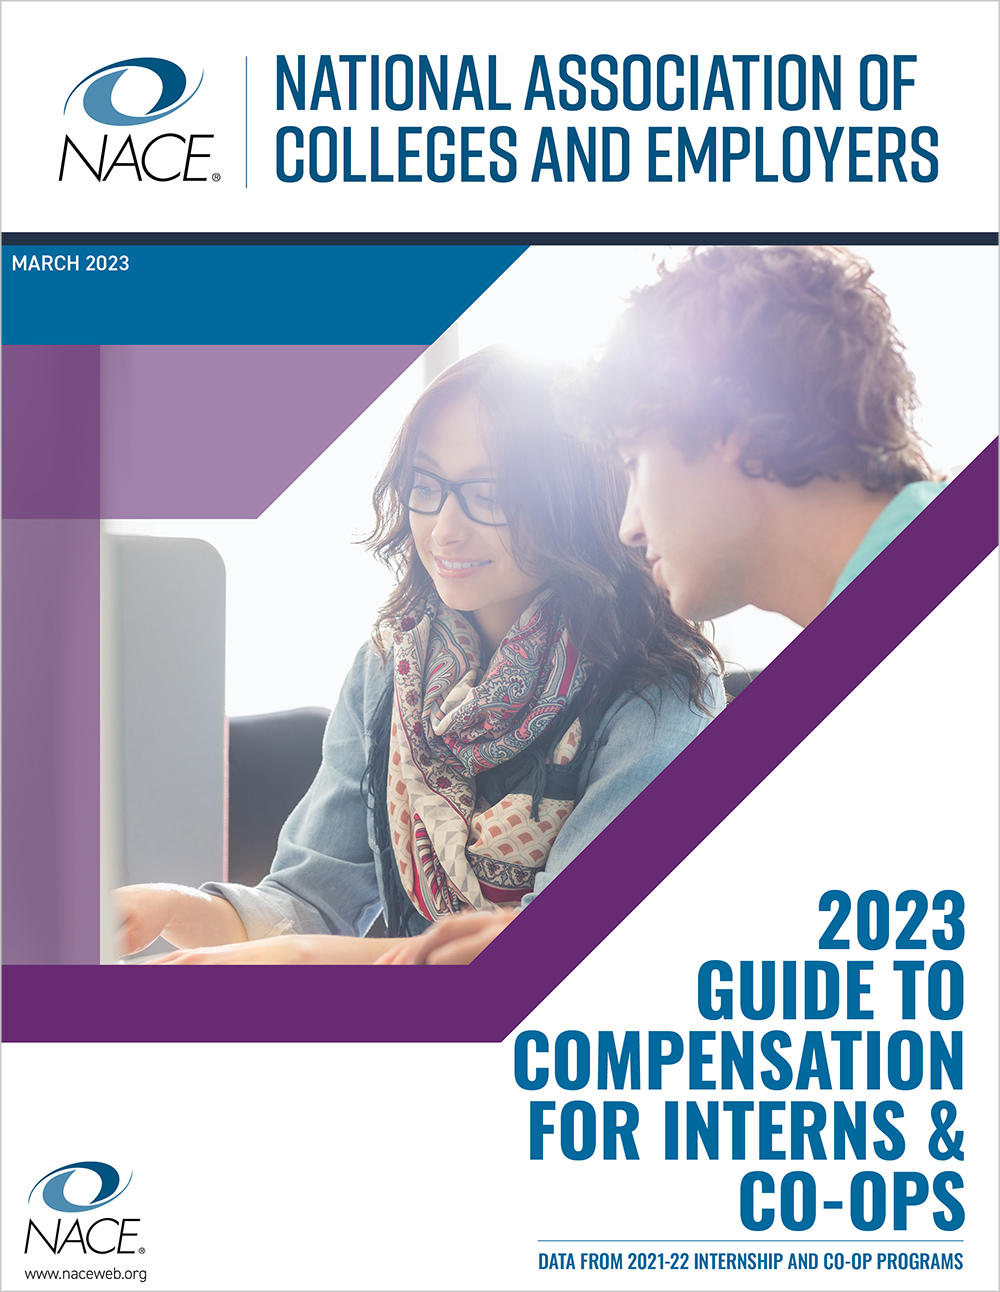 2023 GUIDE TO COMPENSATION FOR INTERNS & CO-OPS